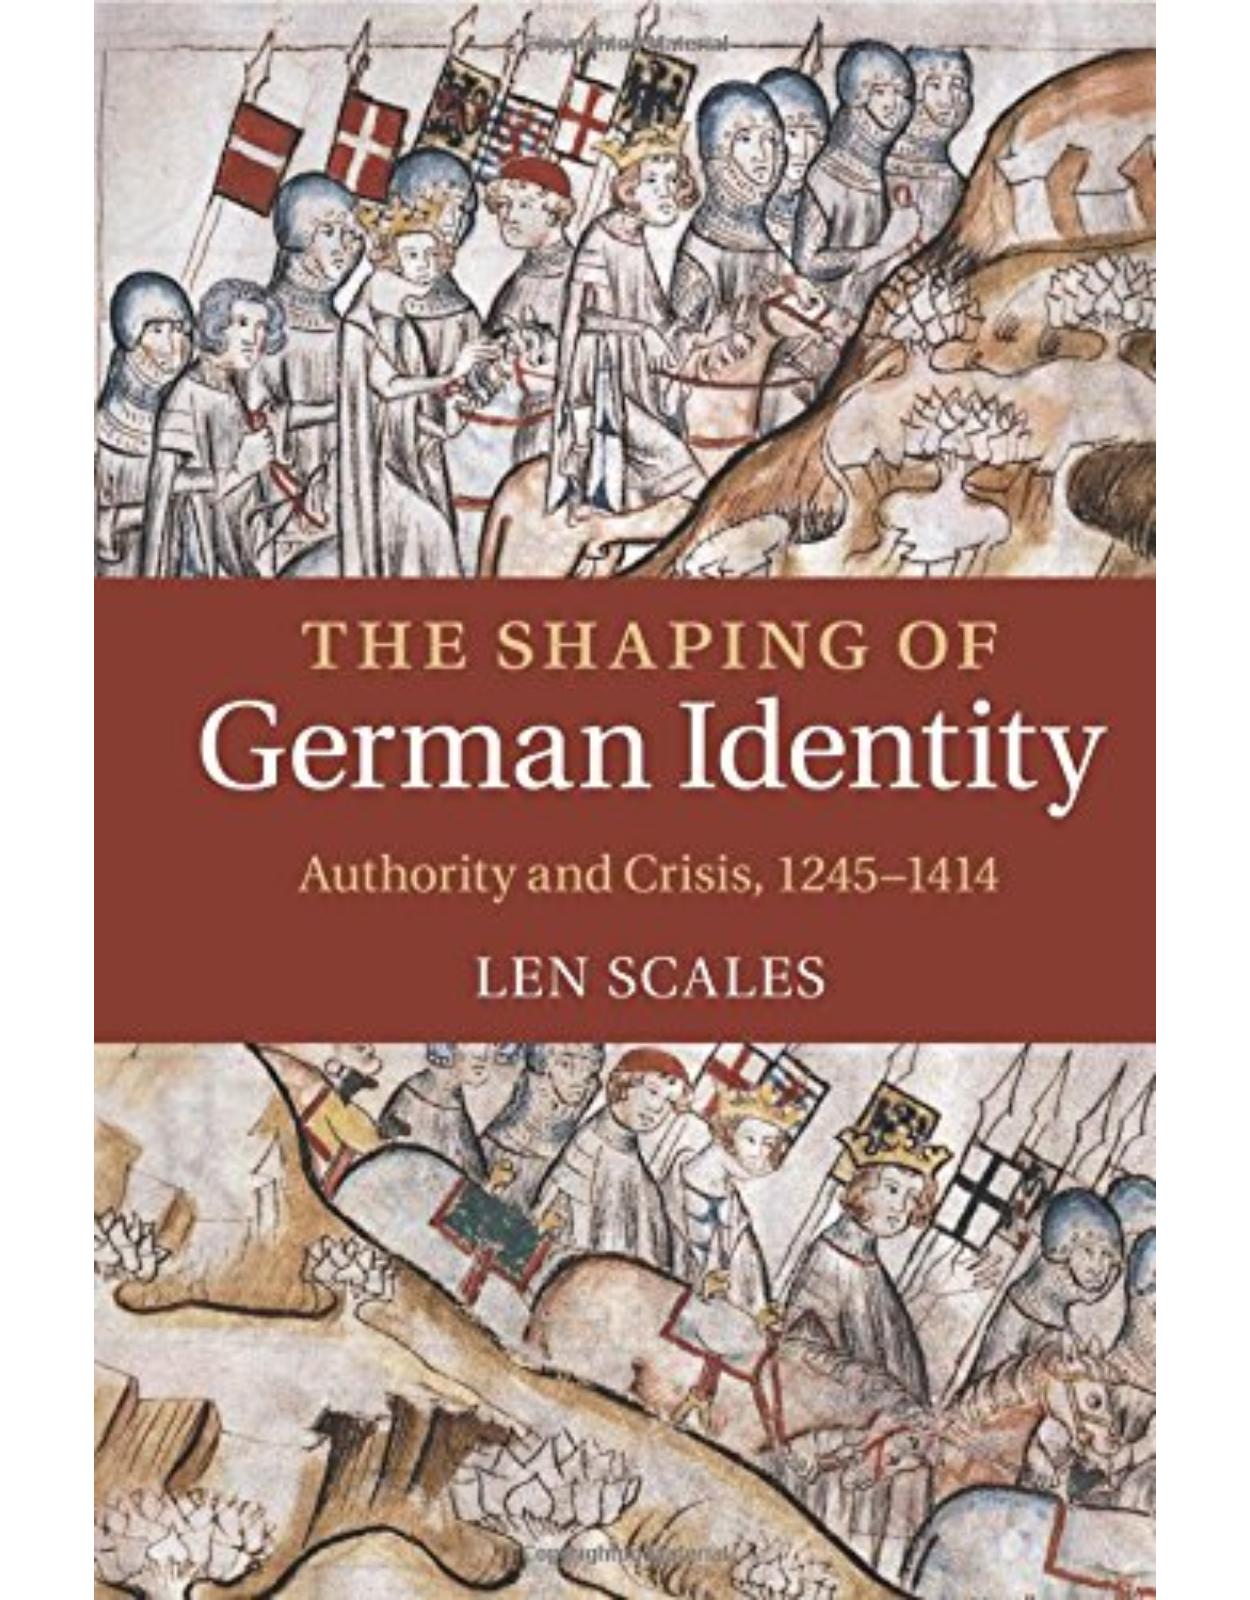 The Shaping of German Identity: Authority and Crisis, 1245-1414